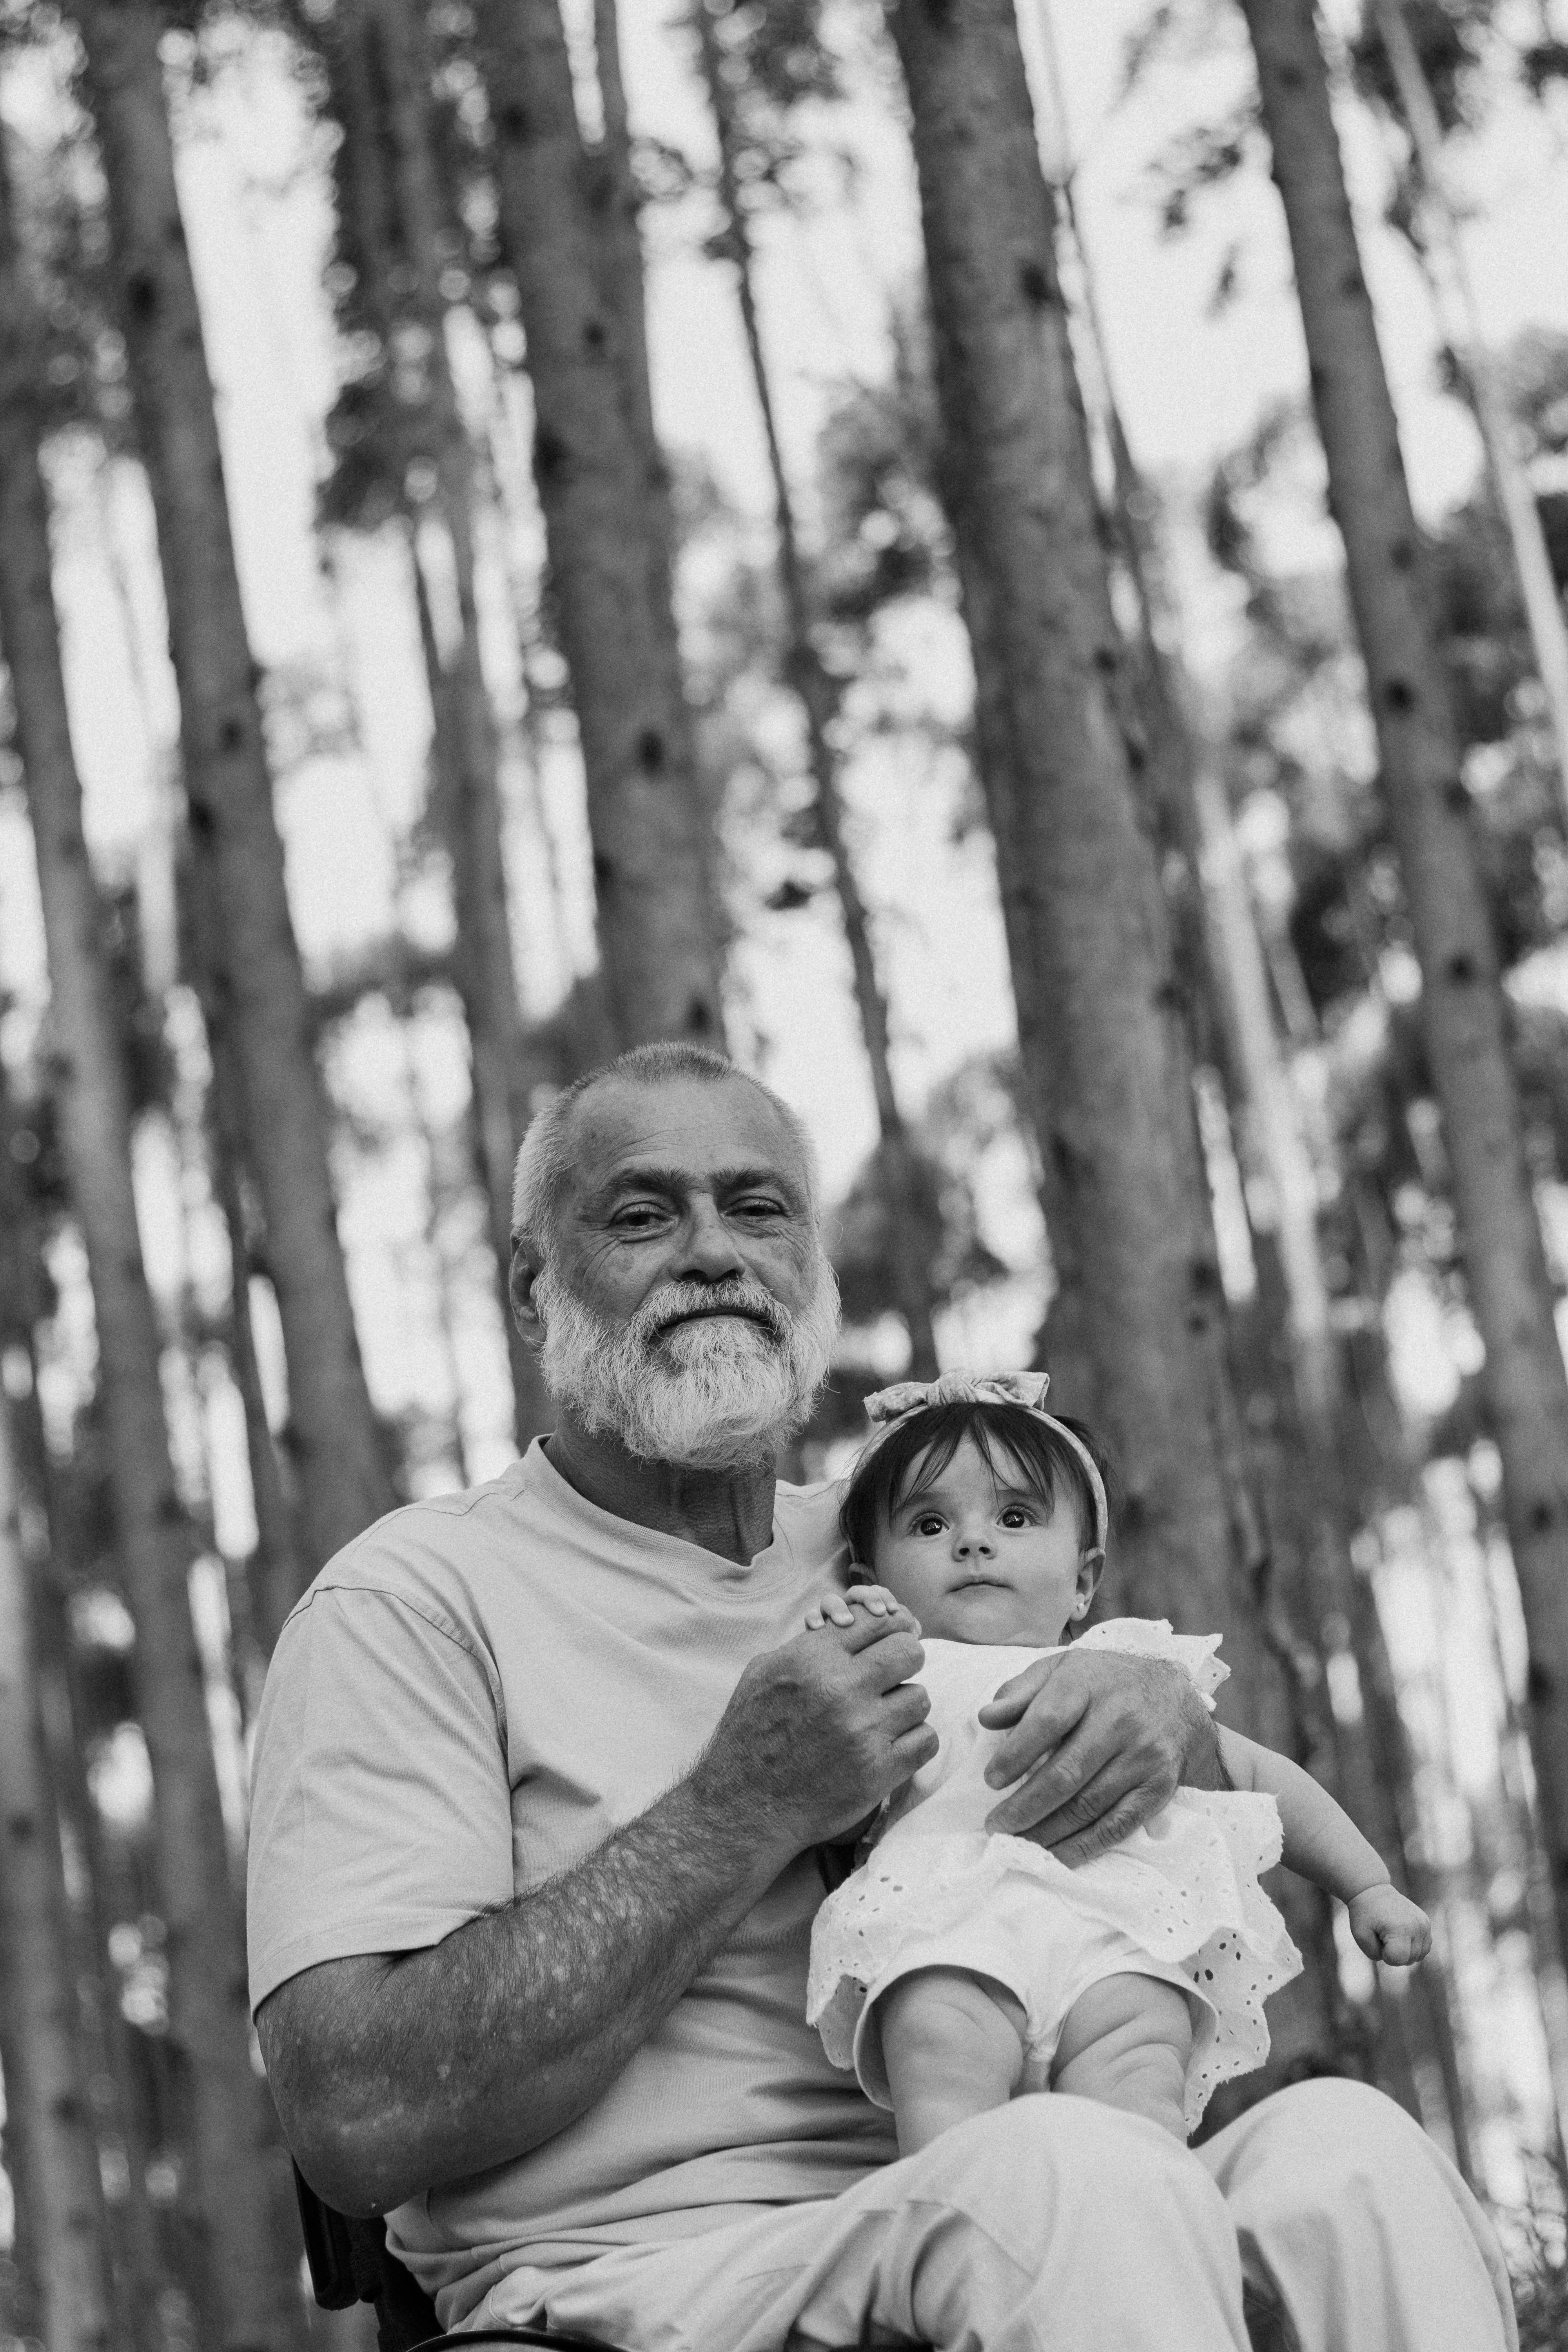 Grandfather and his granddaughter | Source: Pexels